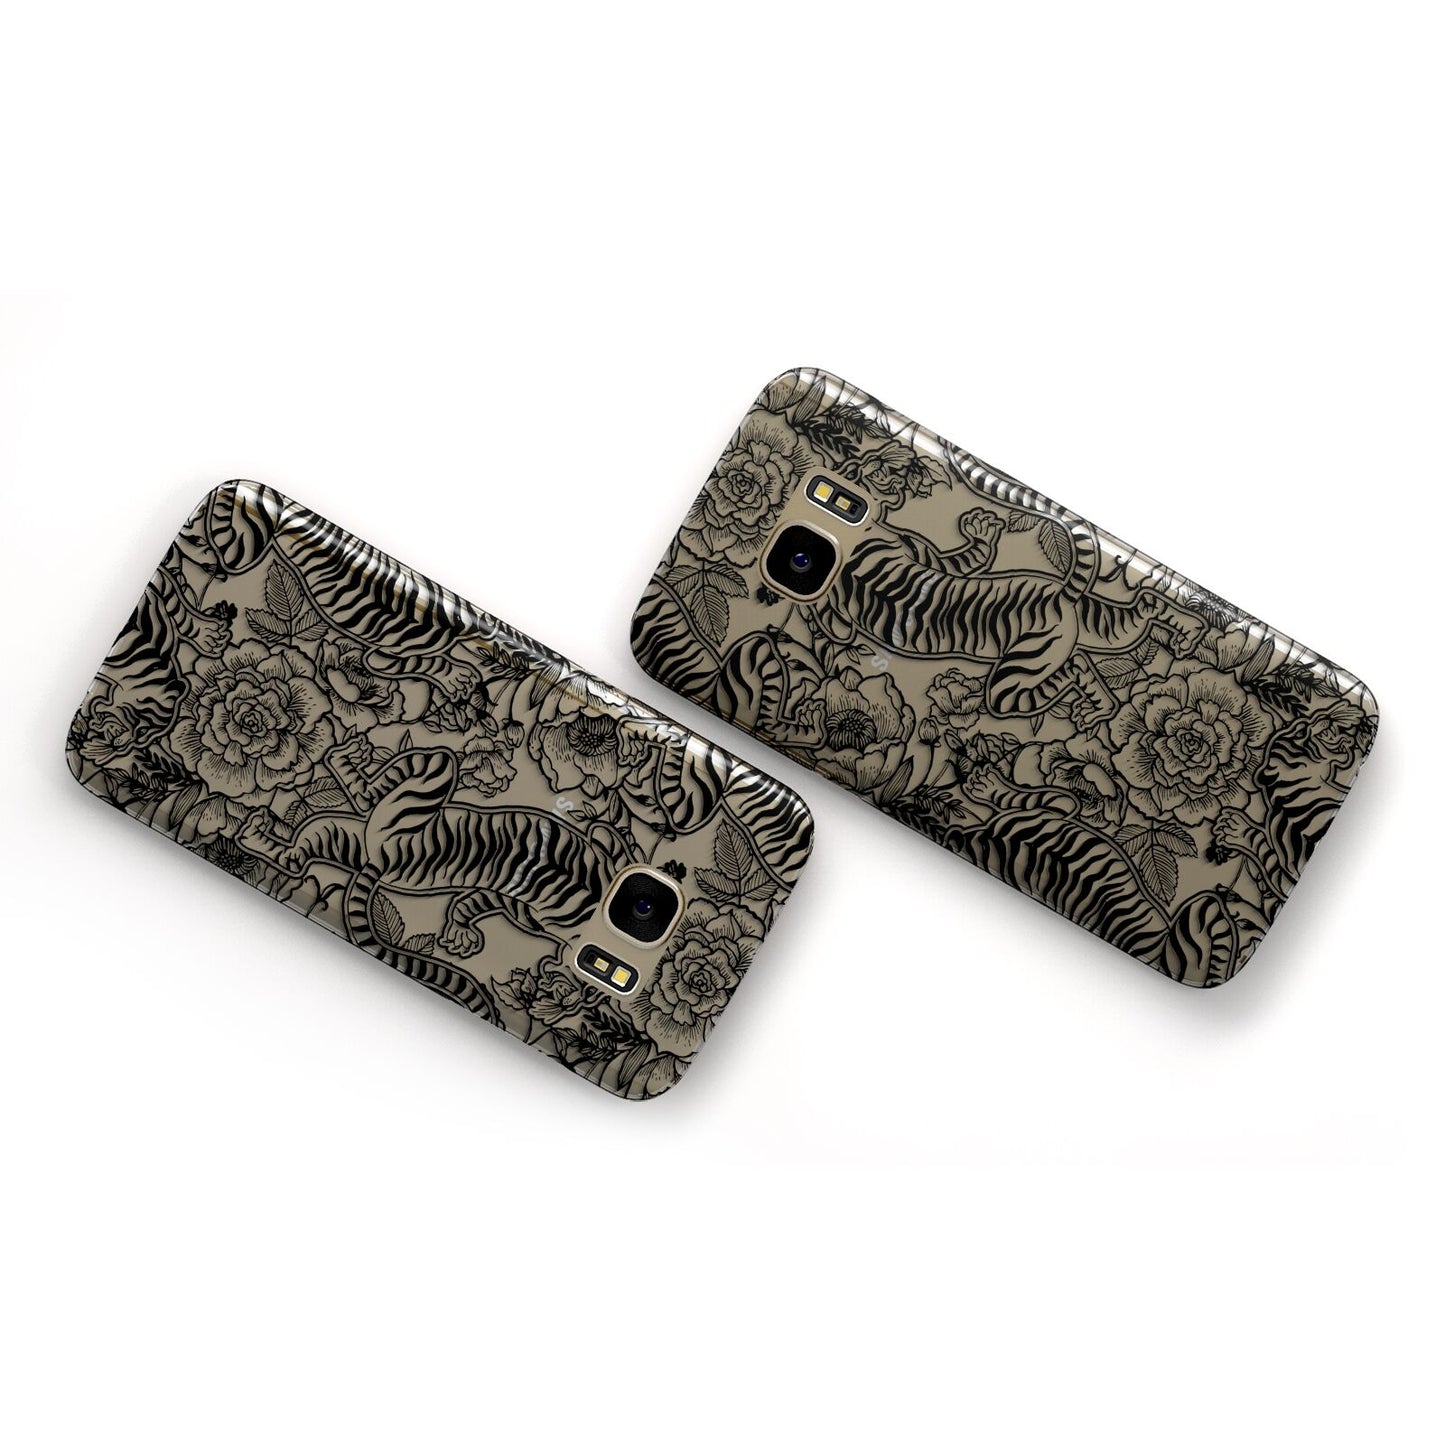 Chinese Tiger Samsung Galaxy Case Flat Overview